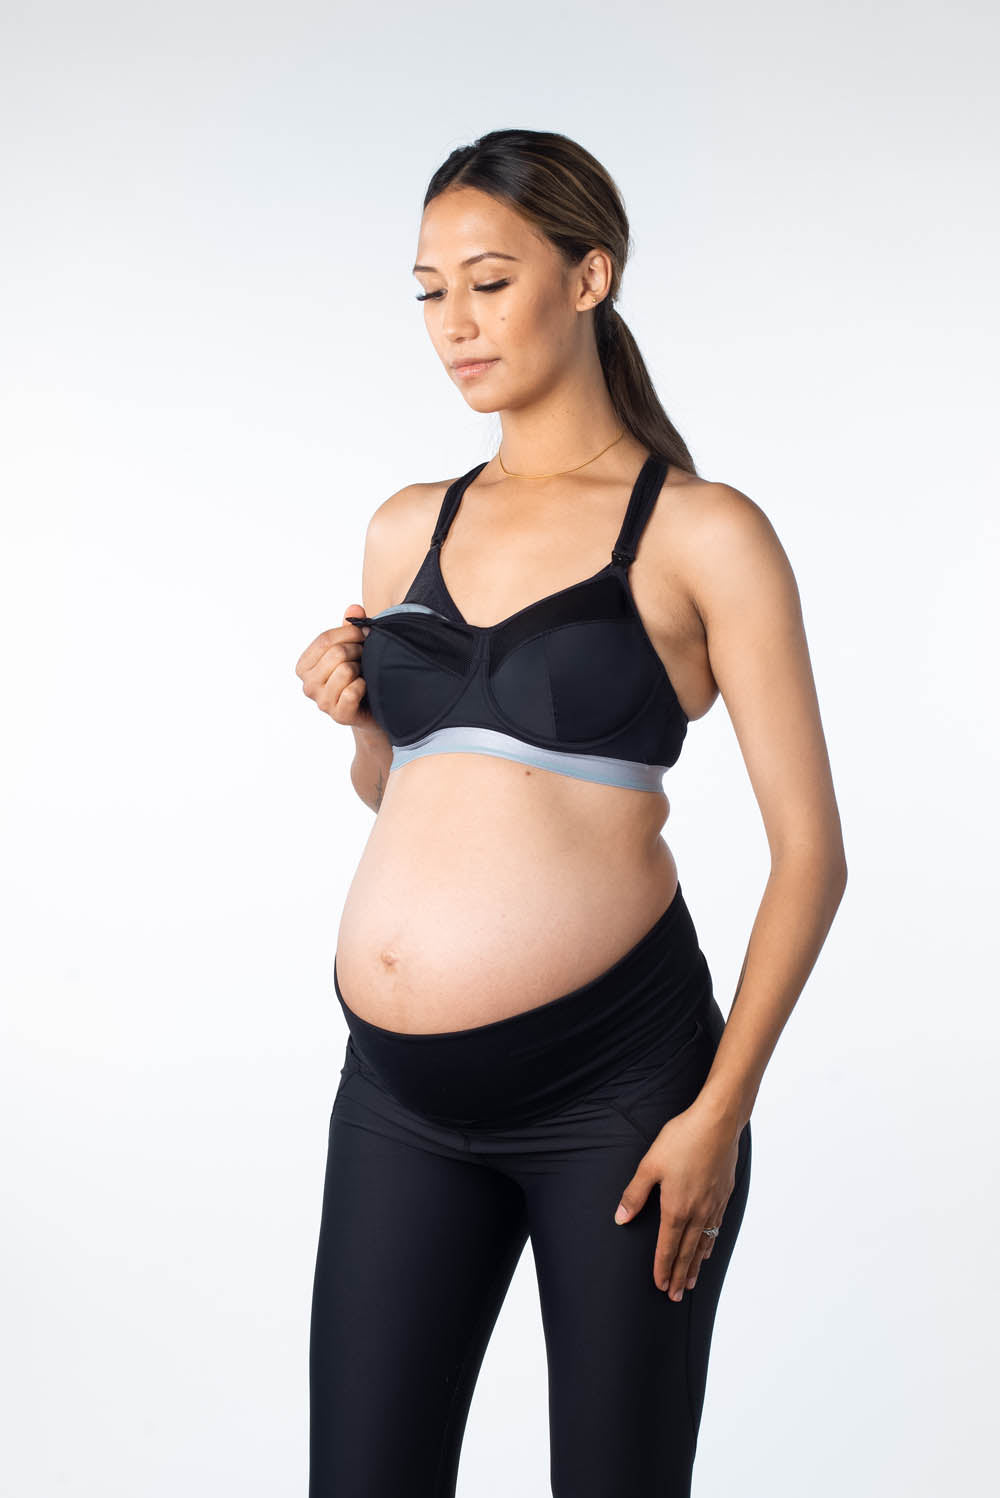 How To Choose The Best Maternity And Nursing Bras: Your Expert Guide -  Women's Health Australia